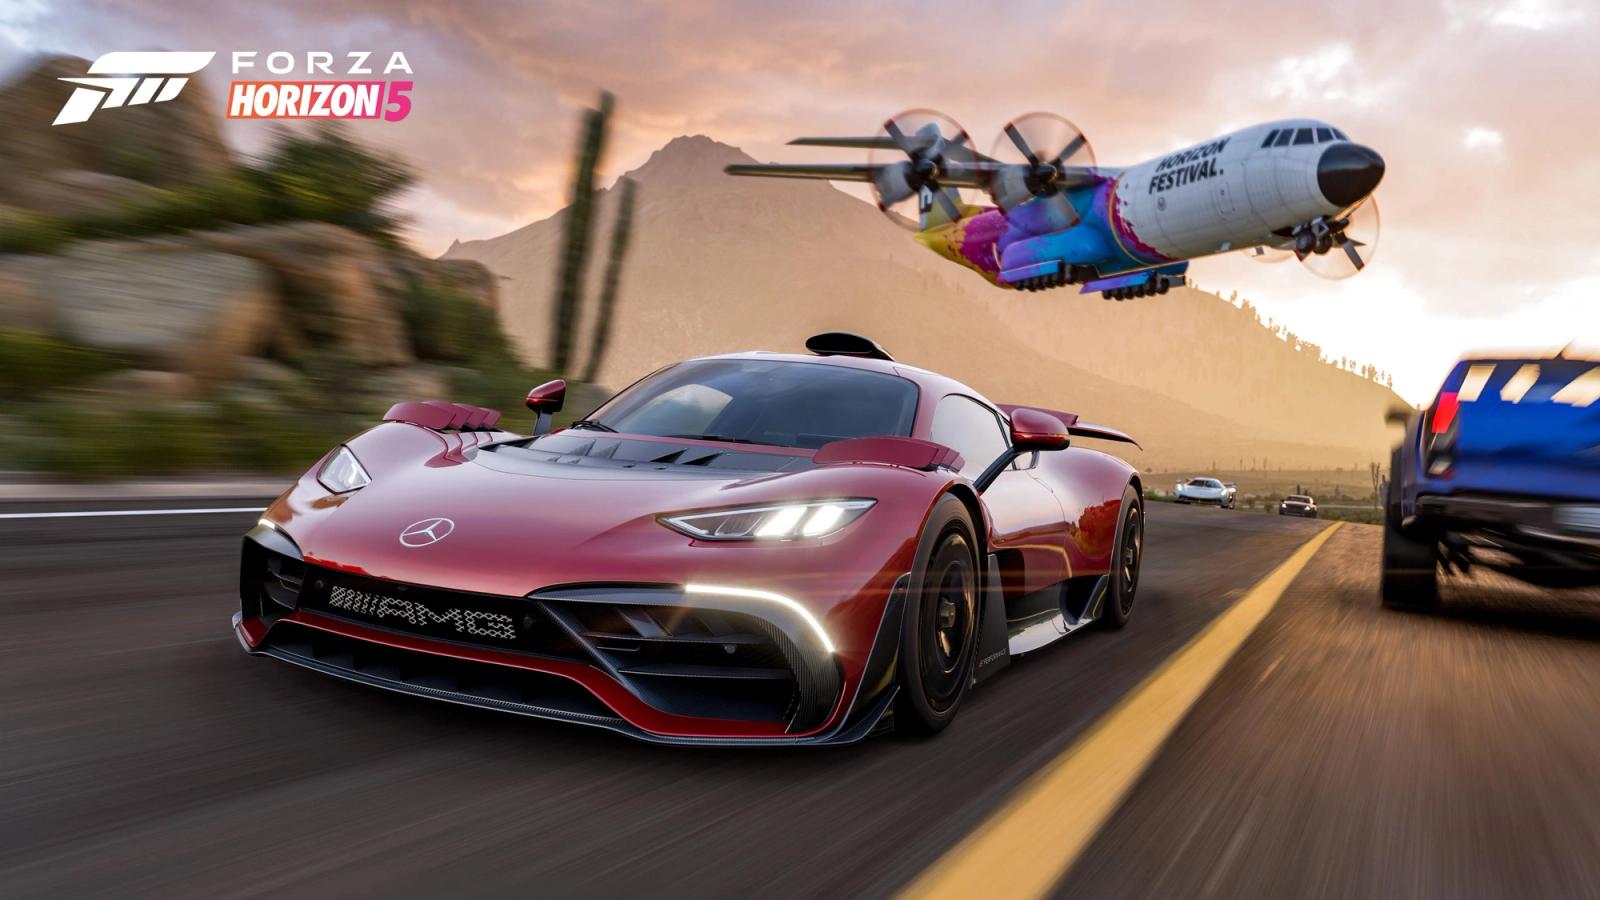 An AMG sports car races as a plane flies low in the background. The sides of the image include motion blur to indicate high speeds